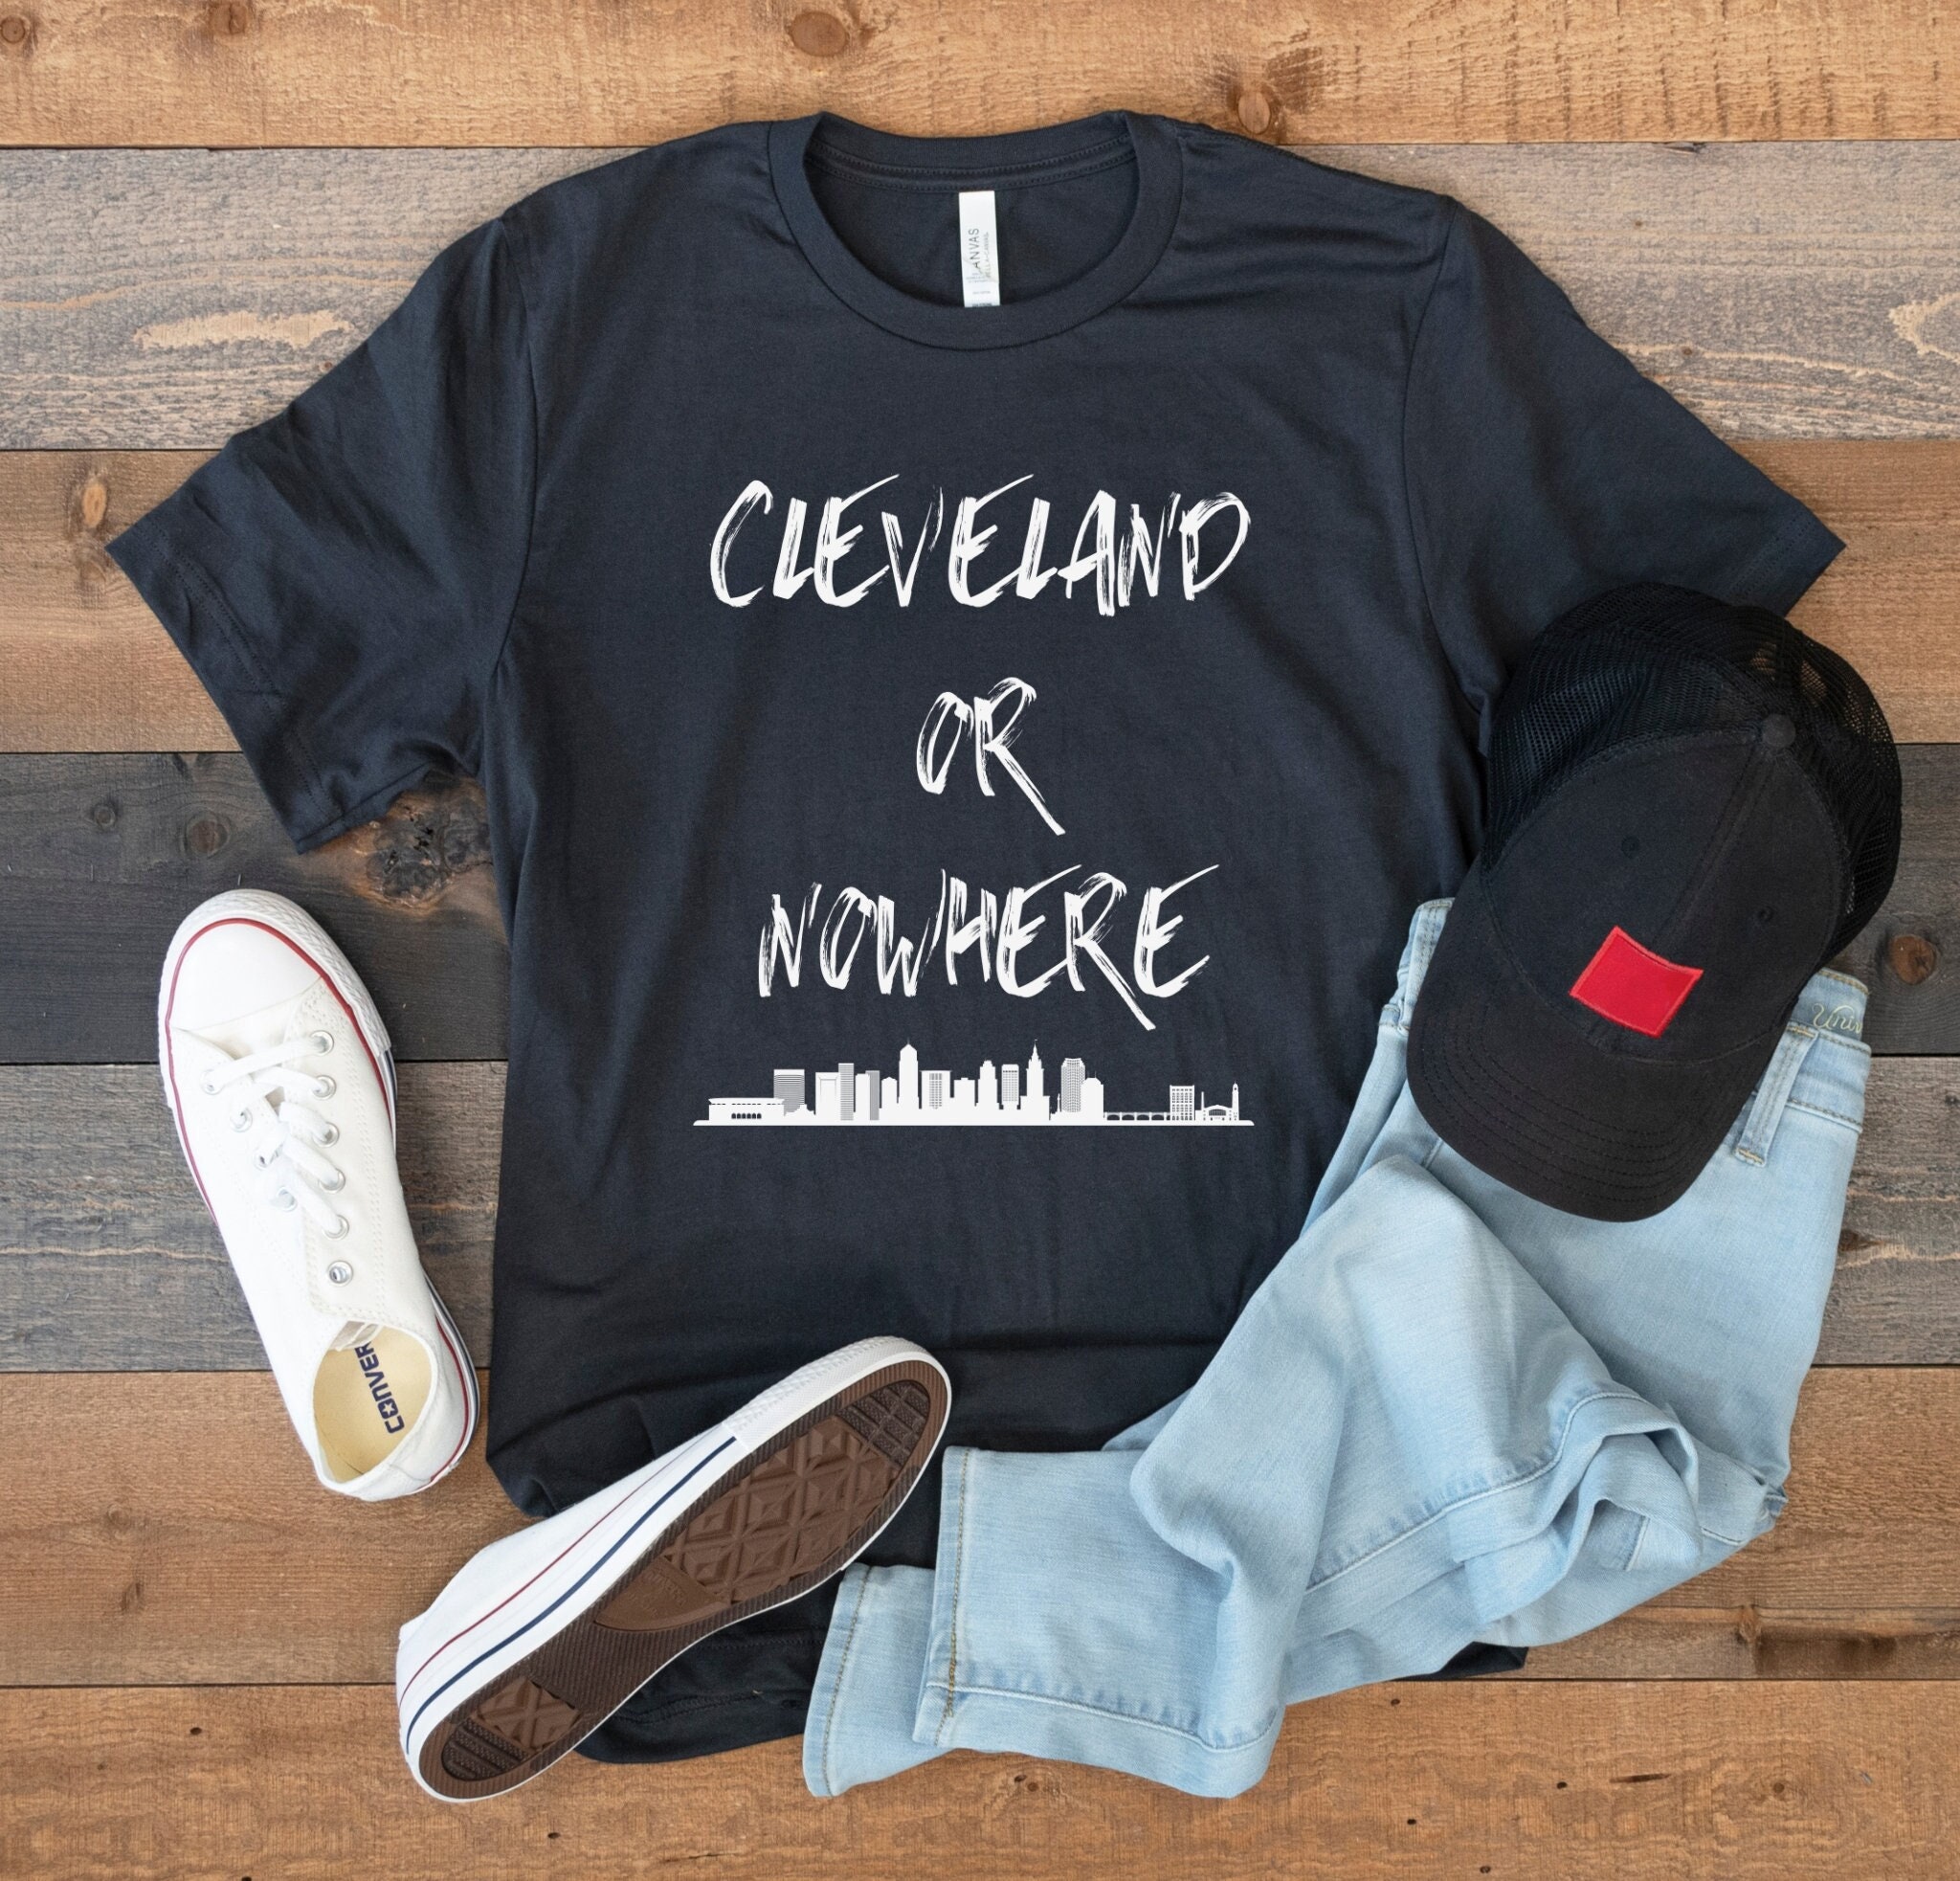 Love Cleveland City Map Cleveland 216 Essential T-Shirt for Sale